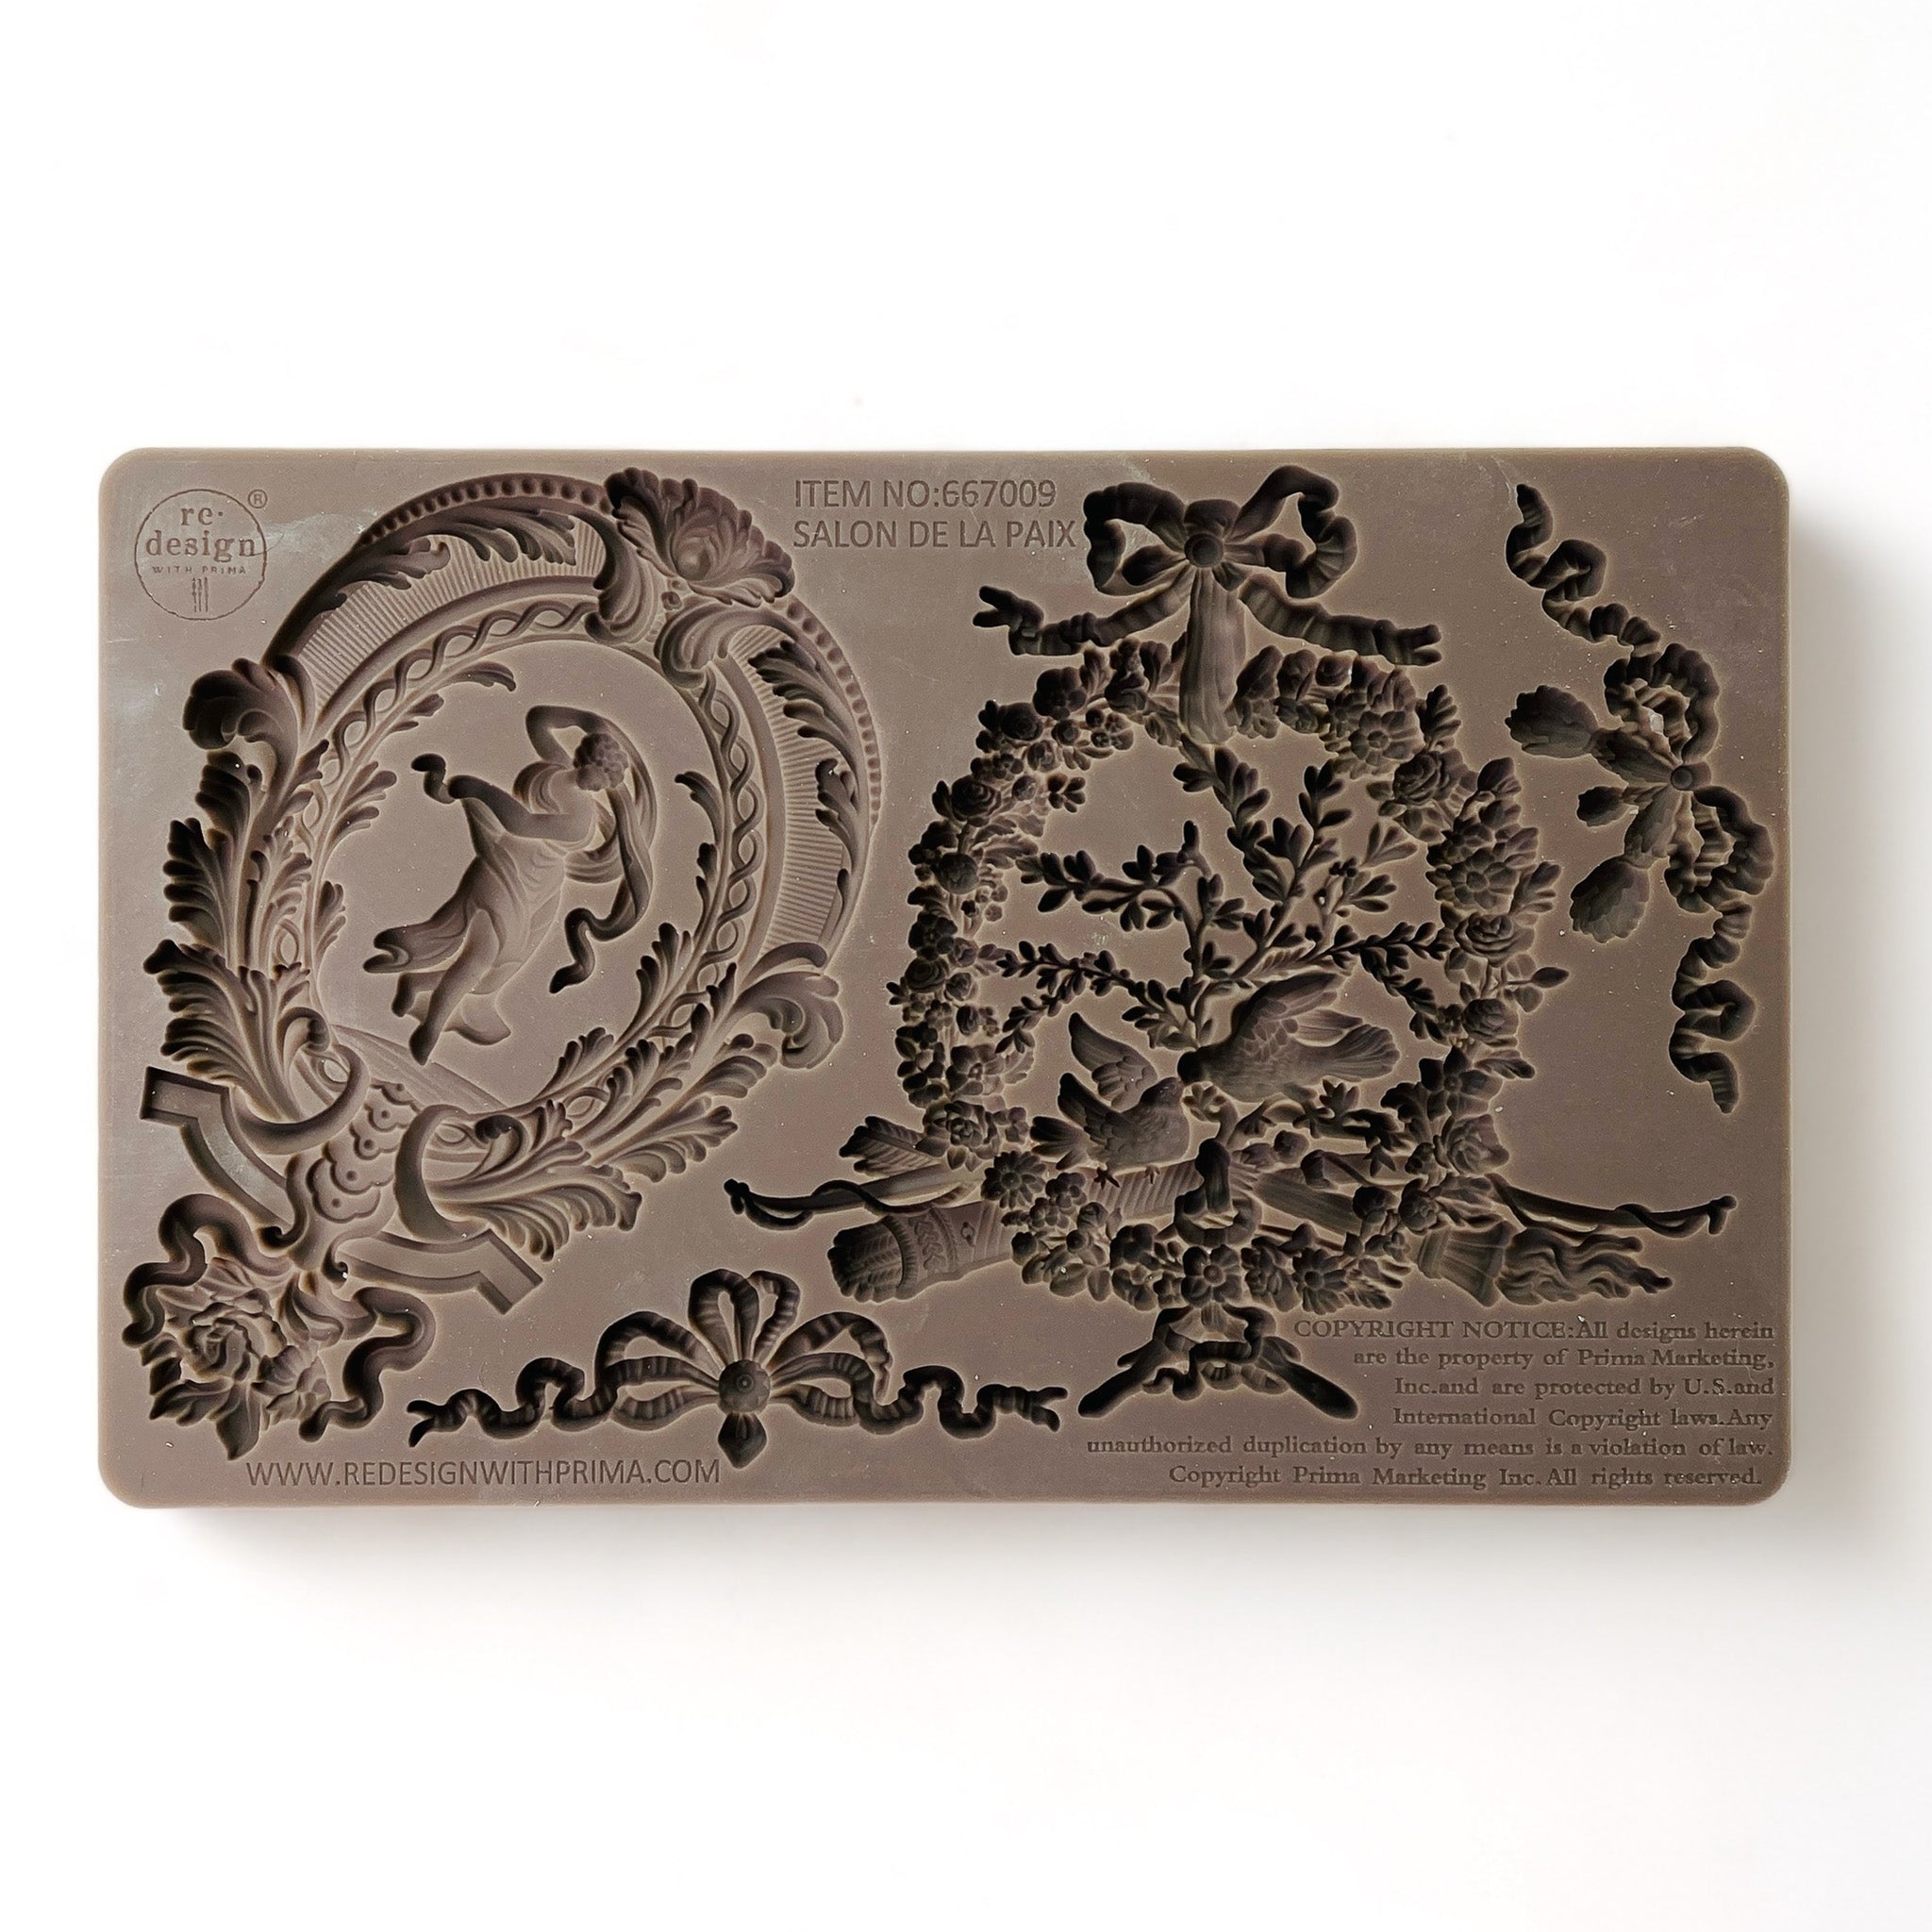 A brown silicone mold that features 2 bows, an ornate oval medallion and an ornate wreath is against a white background.